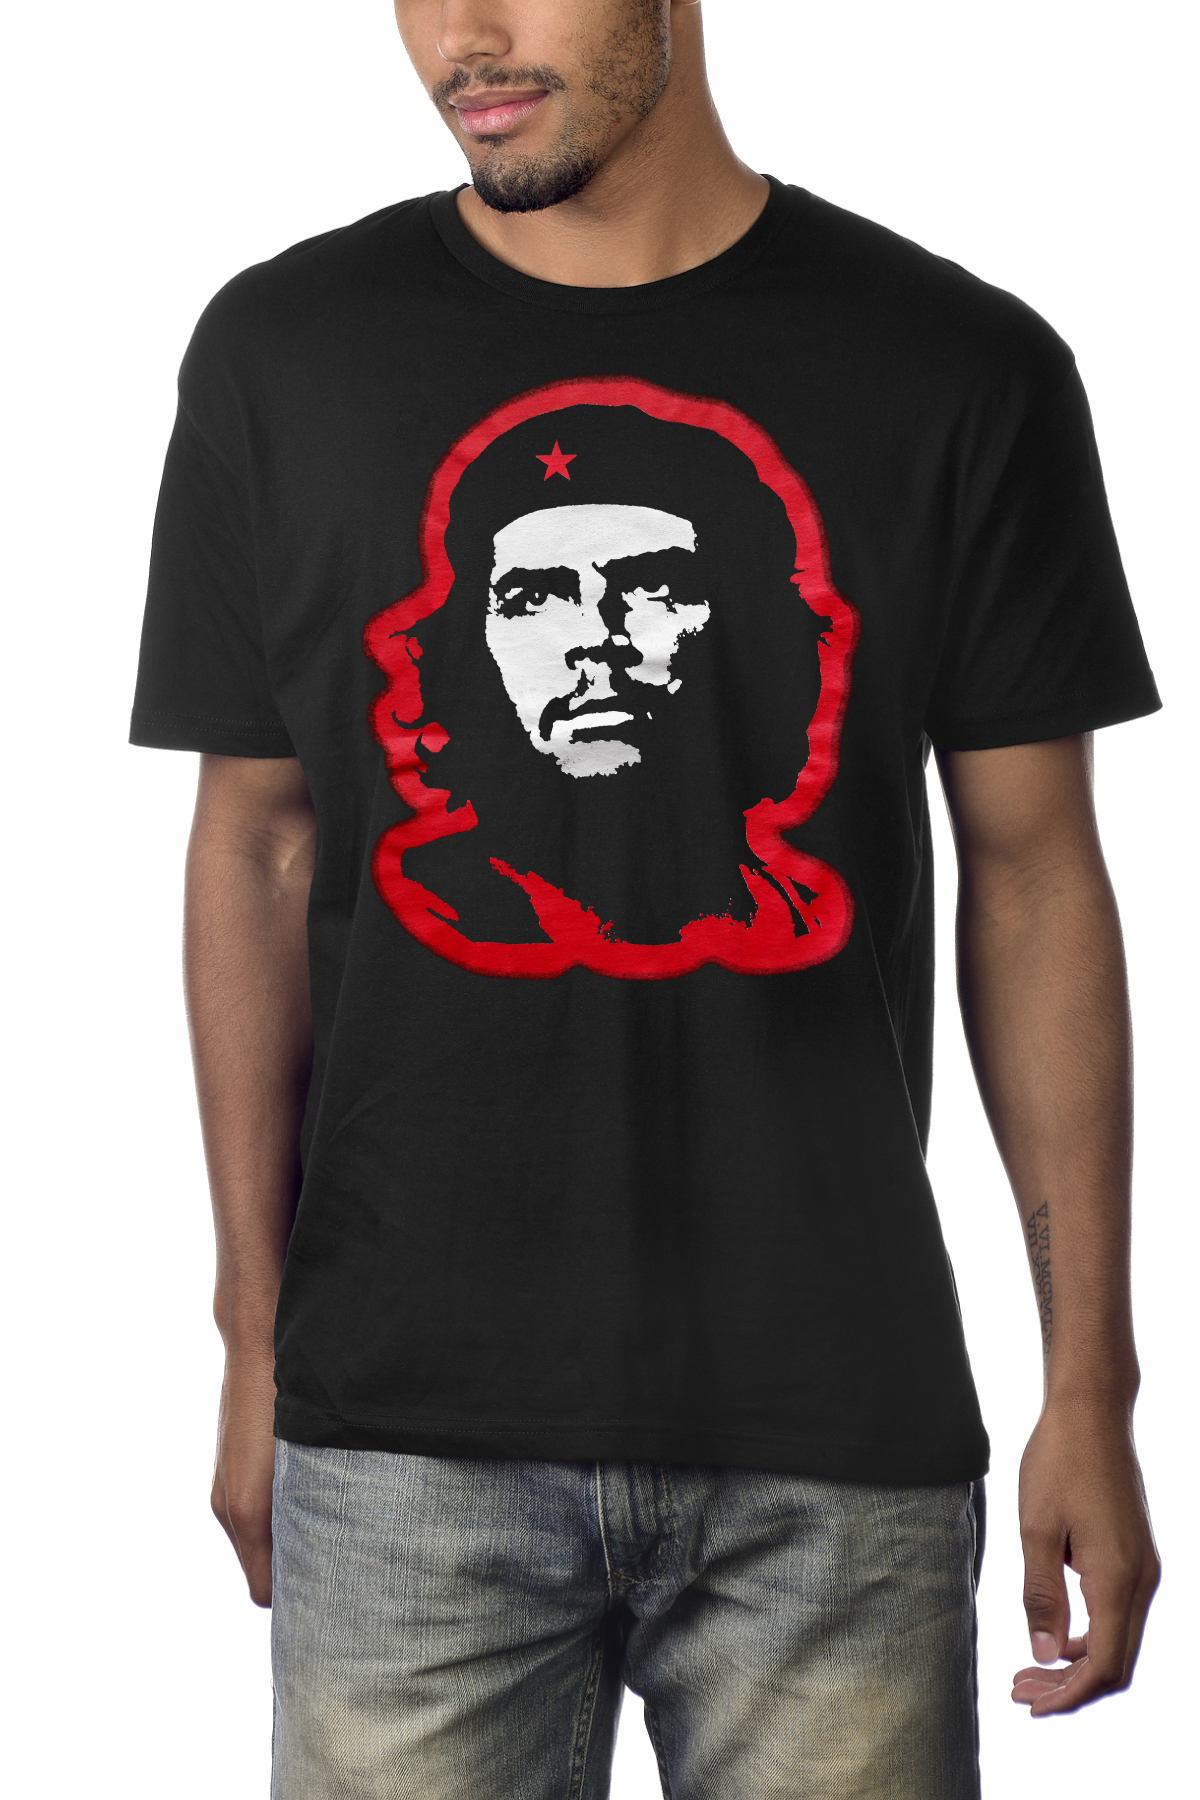 Che Guevara Revolution Novelty Art Mexican American Power Graphic T ...